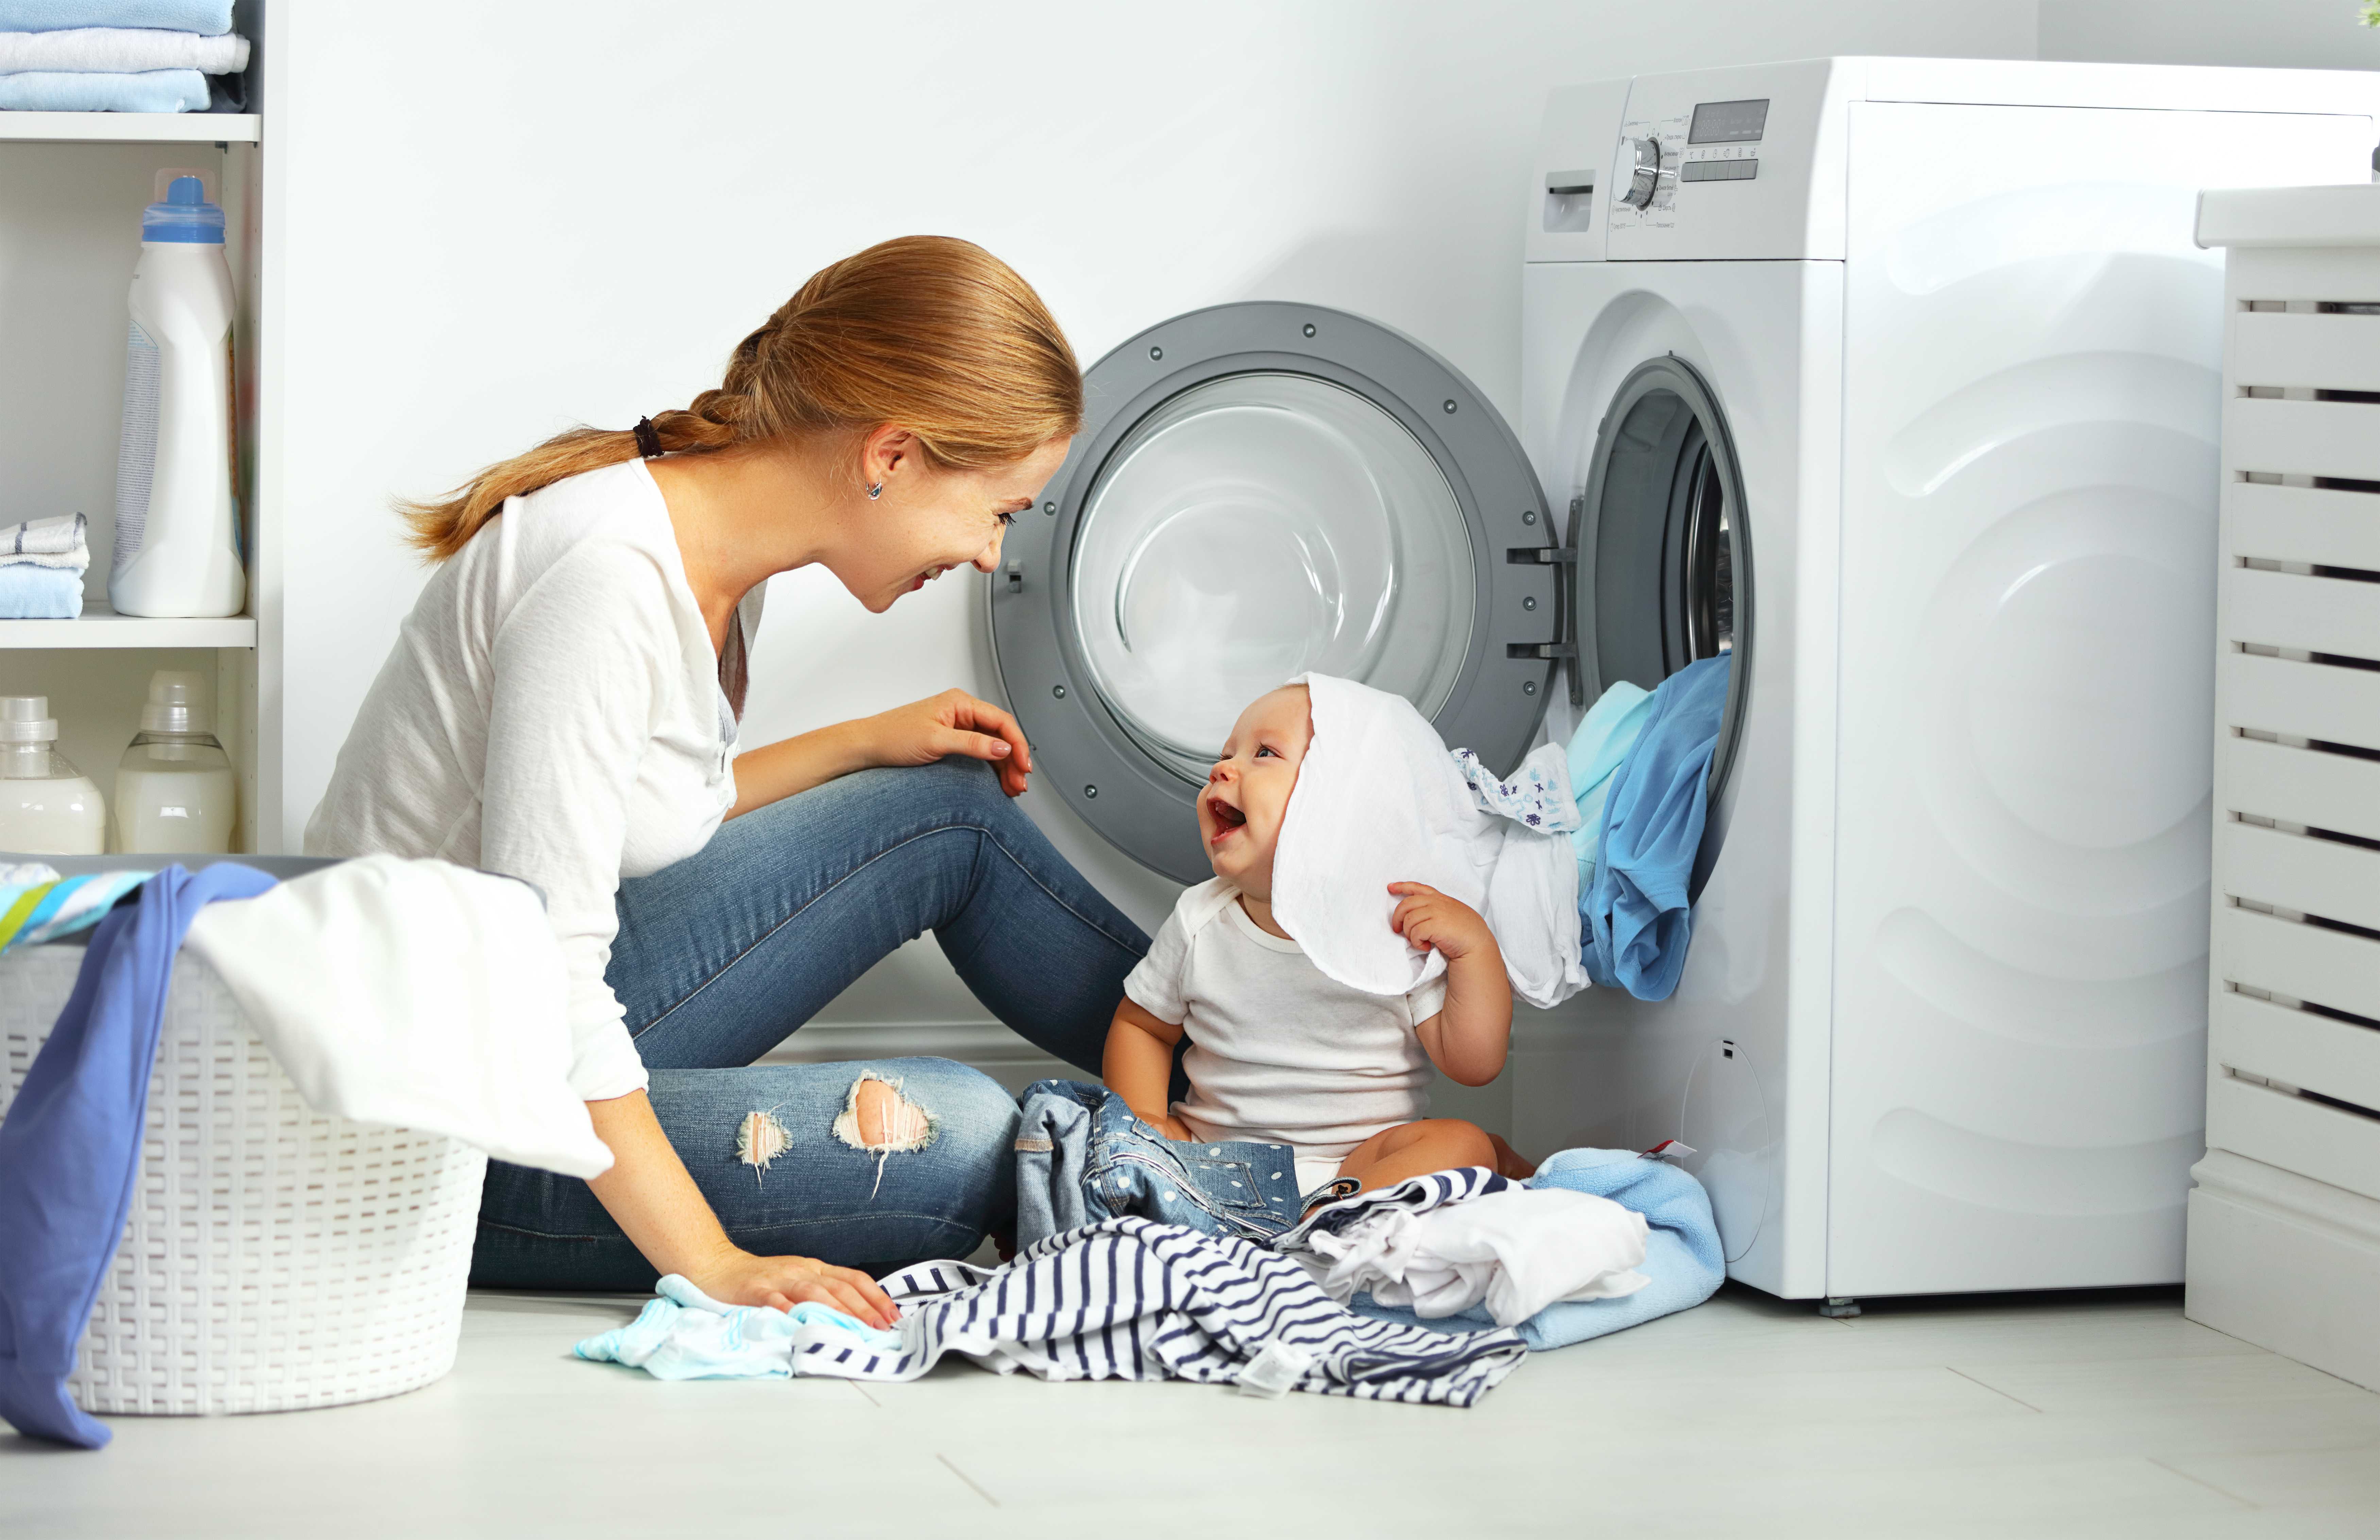 https://www.armandhammer.com/-/media/aah/feature/articles/laundry-articles/baby-clothes--header-image.jpg